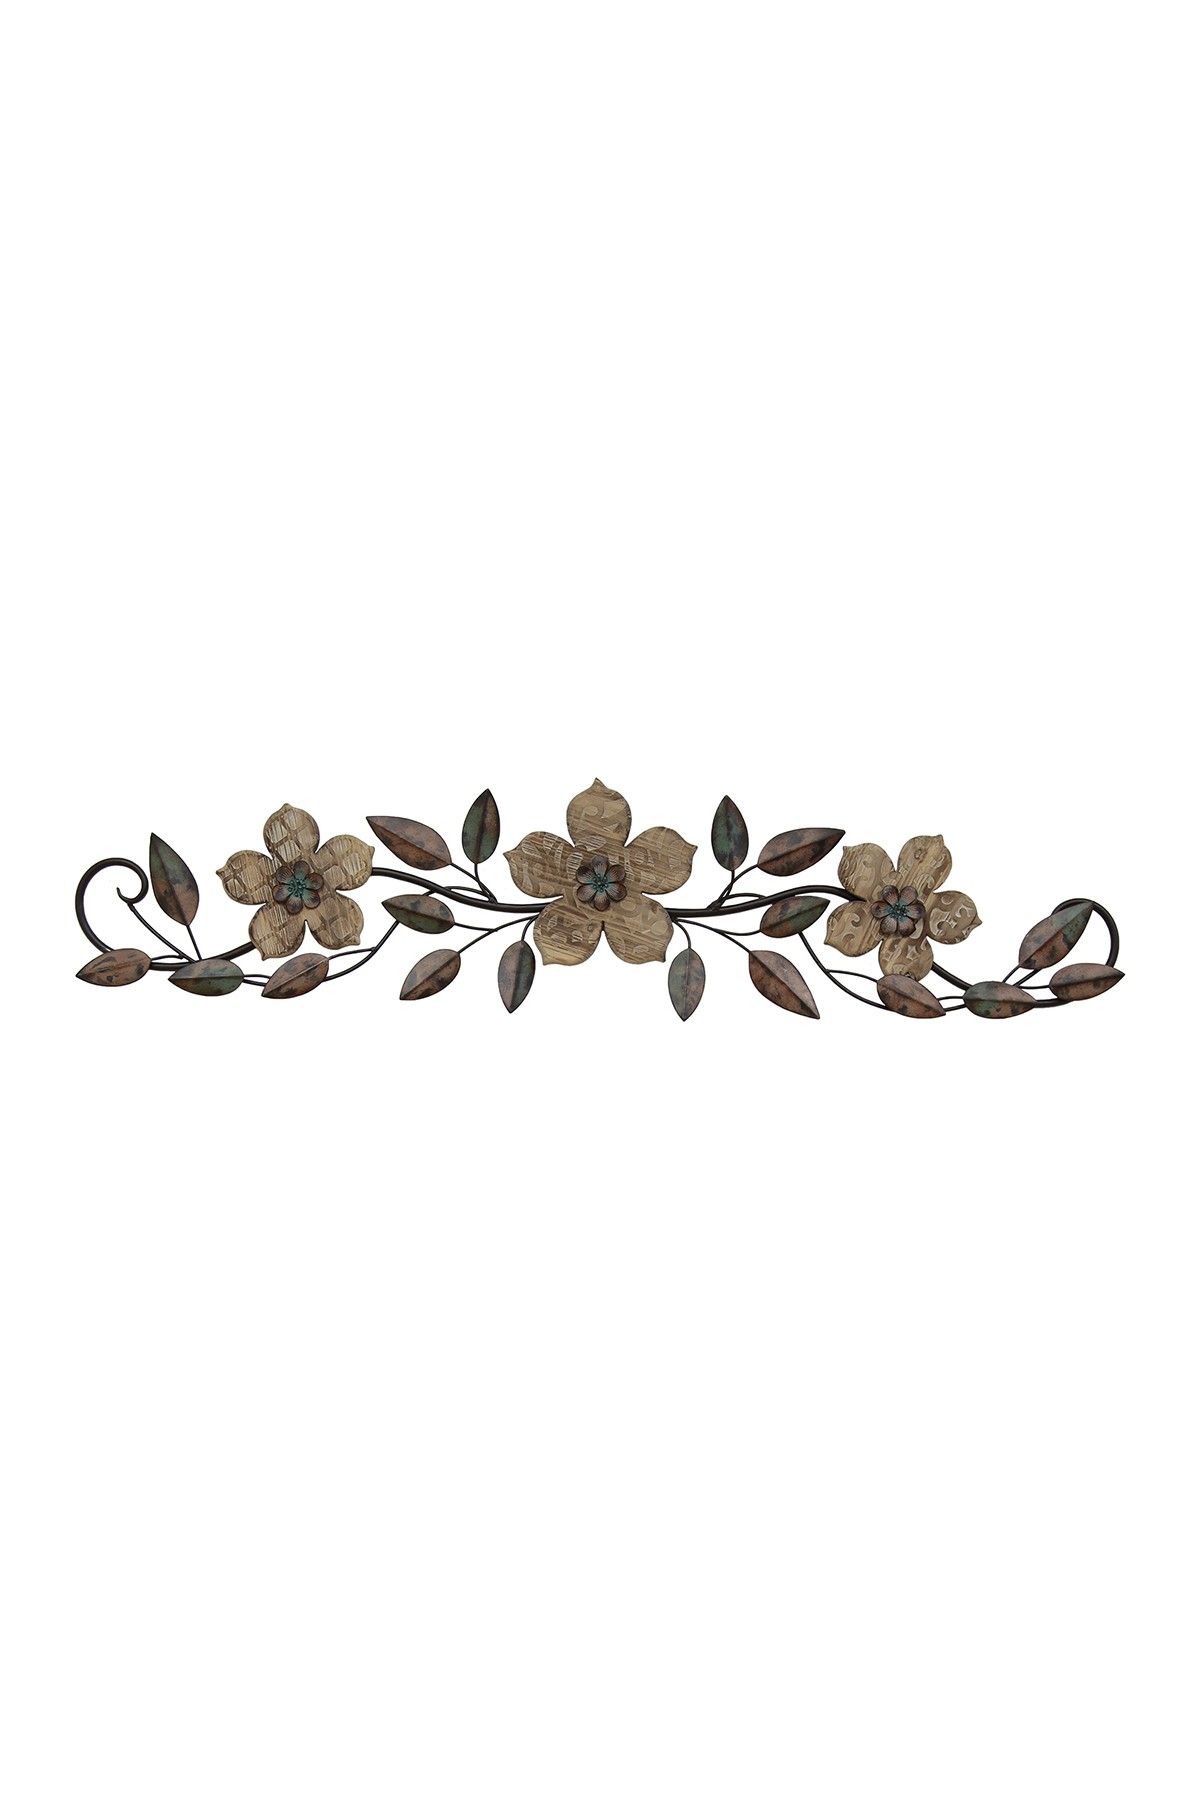 Stratton Home | Floral Patterned Wood Over The Door Multicolor Wall Decor |  Nordstrom Rack Regarding Floral Patterned Over The Door Wall Decor (View 3 of 30)